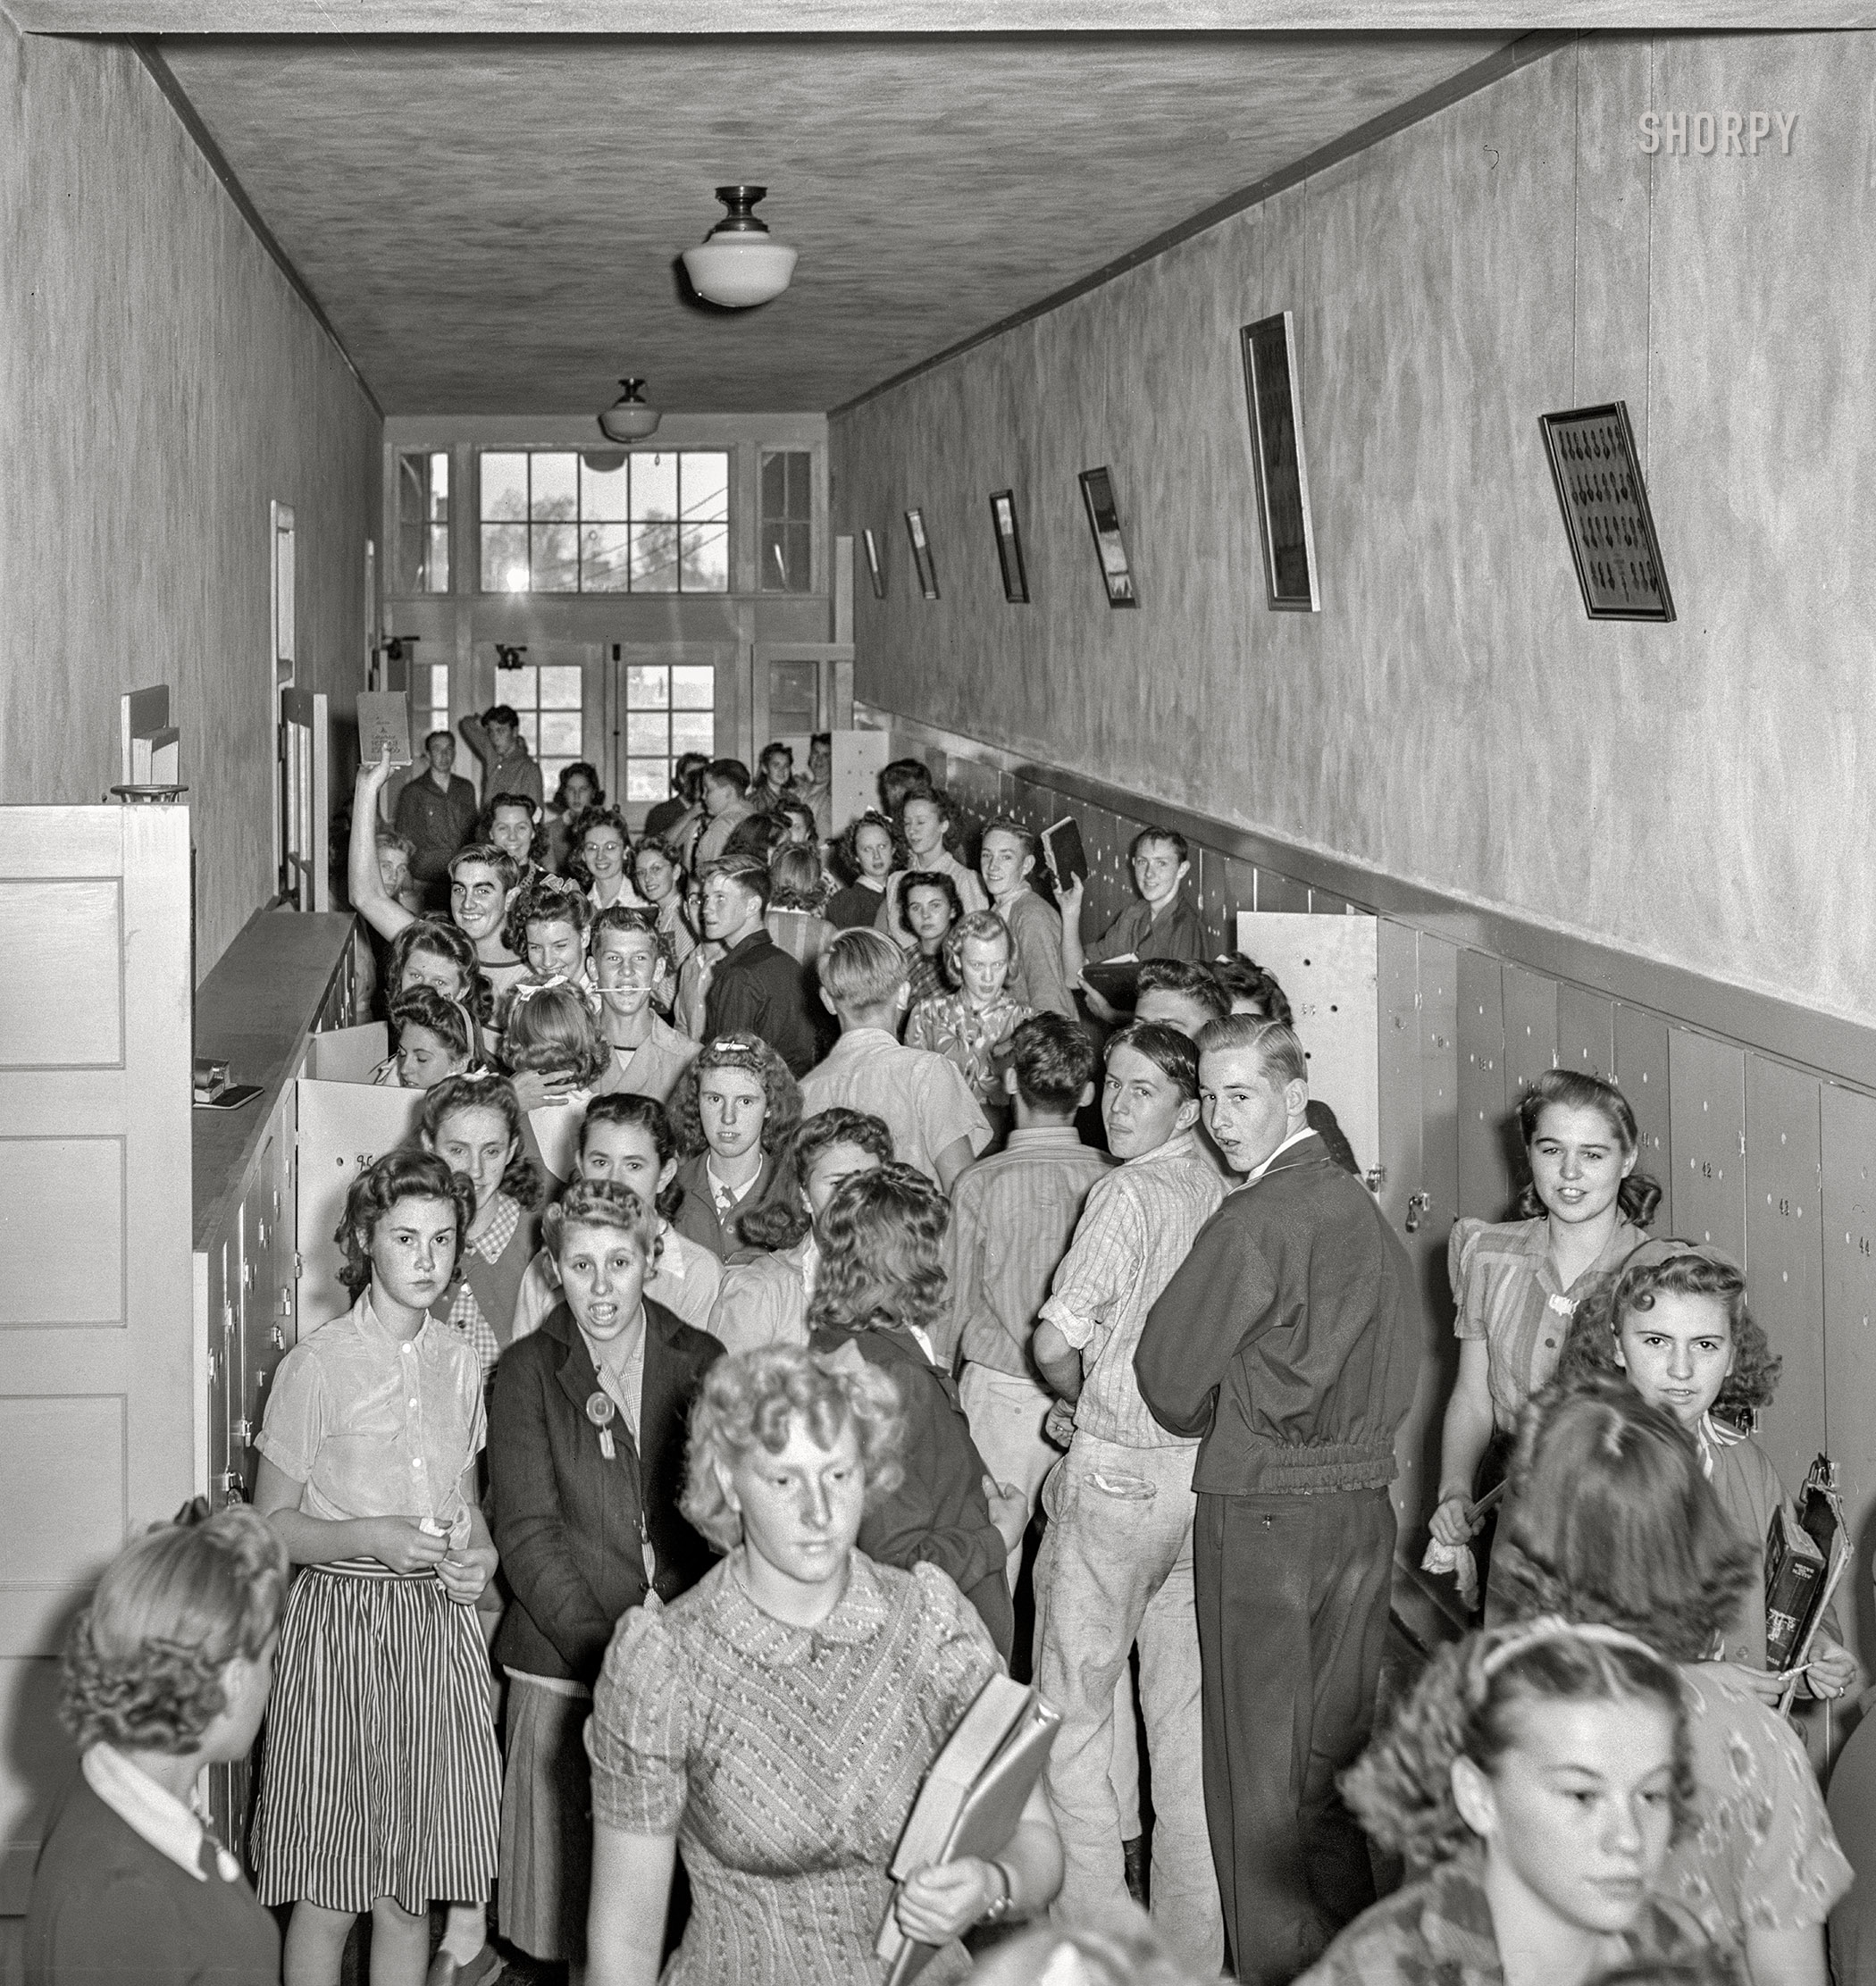 September 1941. Hermiston, Oregon. "Crowded halls in high school between classes." Another look at the Kids in the Hall last seen here, including That Guy With the Eyebrows. Medium format acetate negative by Russell Lee for the Farm Security Administration. View full size.